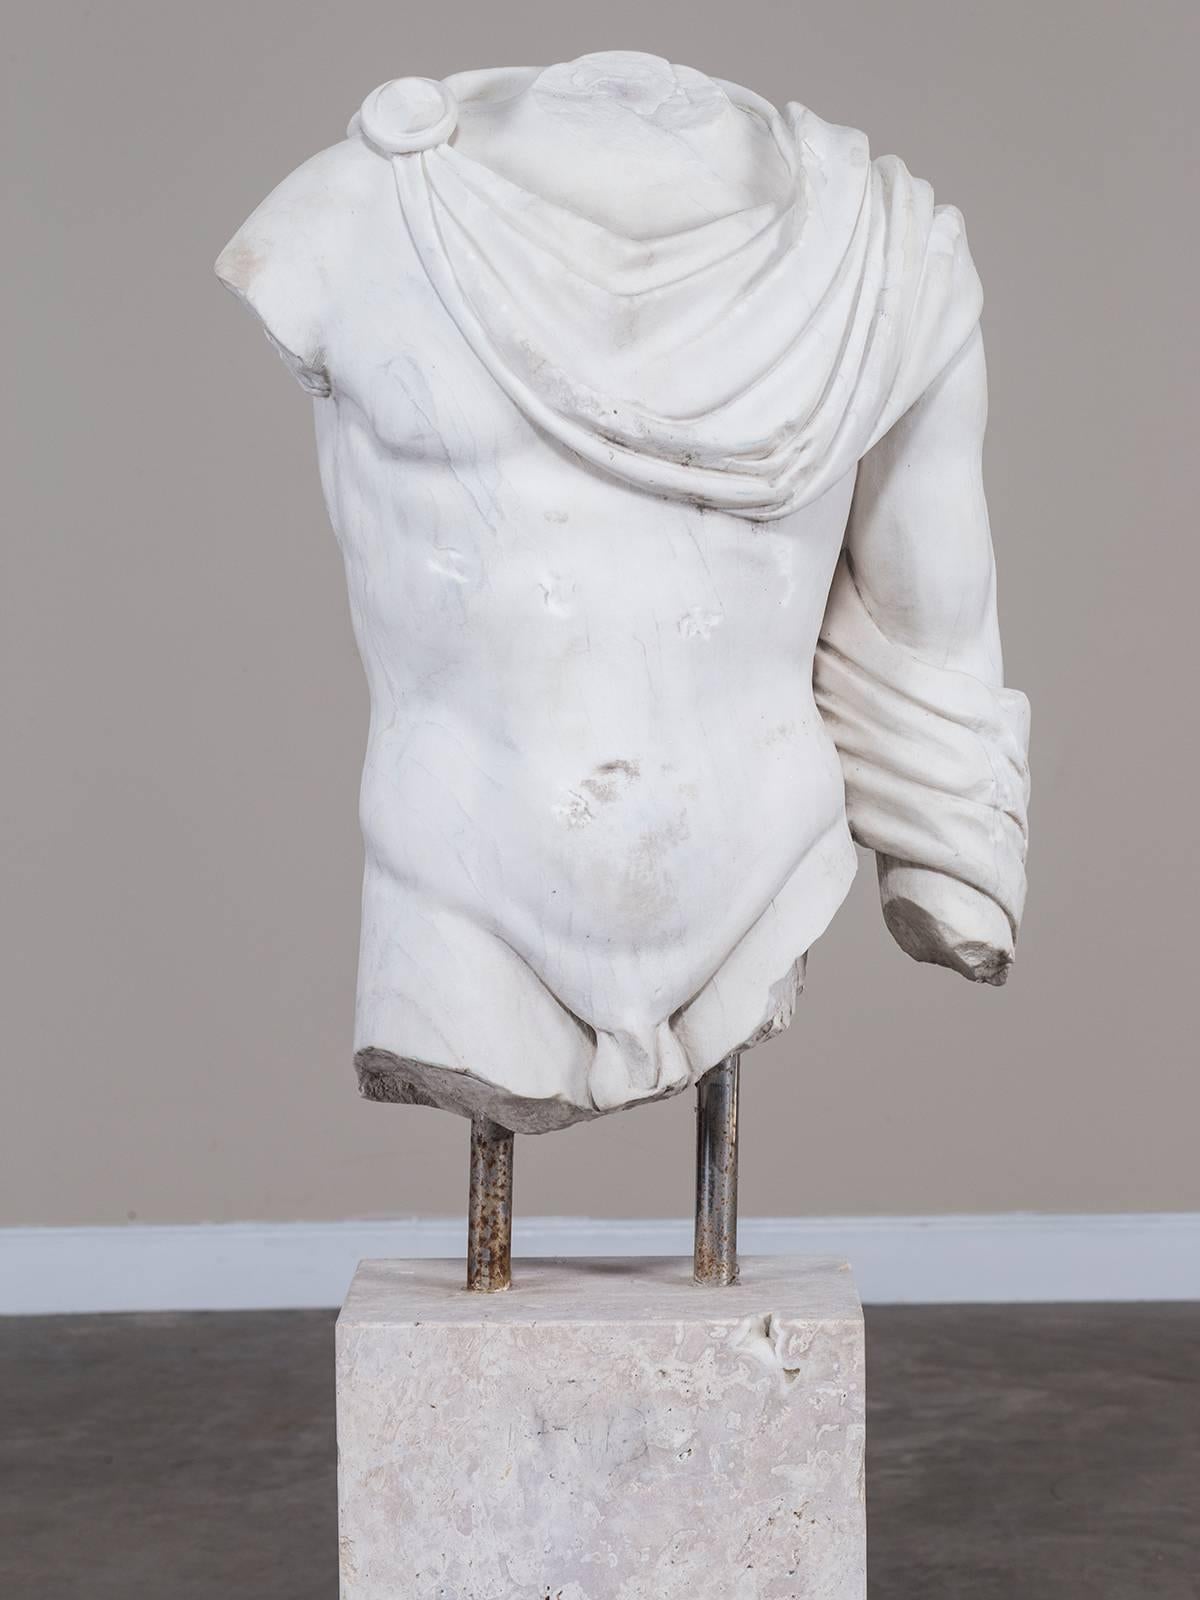 Receive our new selections direct from 1stdibs by email each week. Please click Follow Dealer below and see them first!

This exquisite vintage copy of an antique original Roman marble sculpture circa 2000 showcases the sculptural artistry of